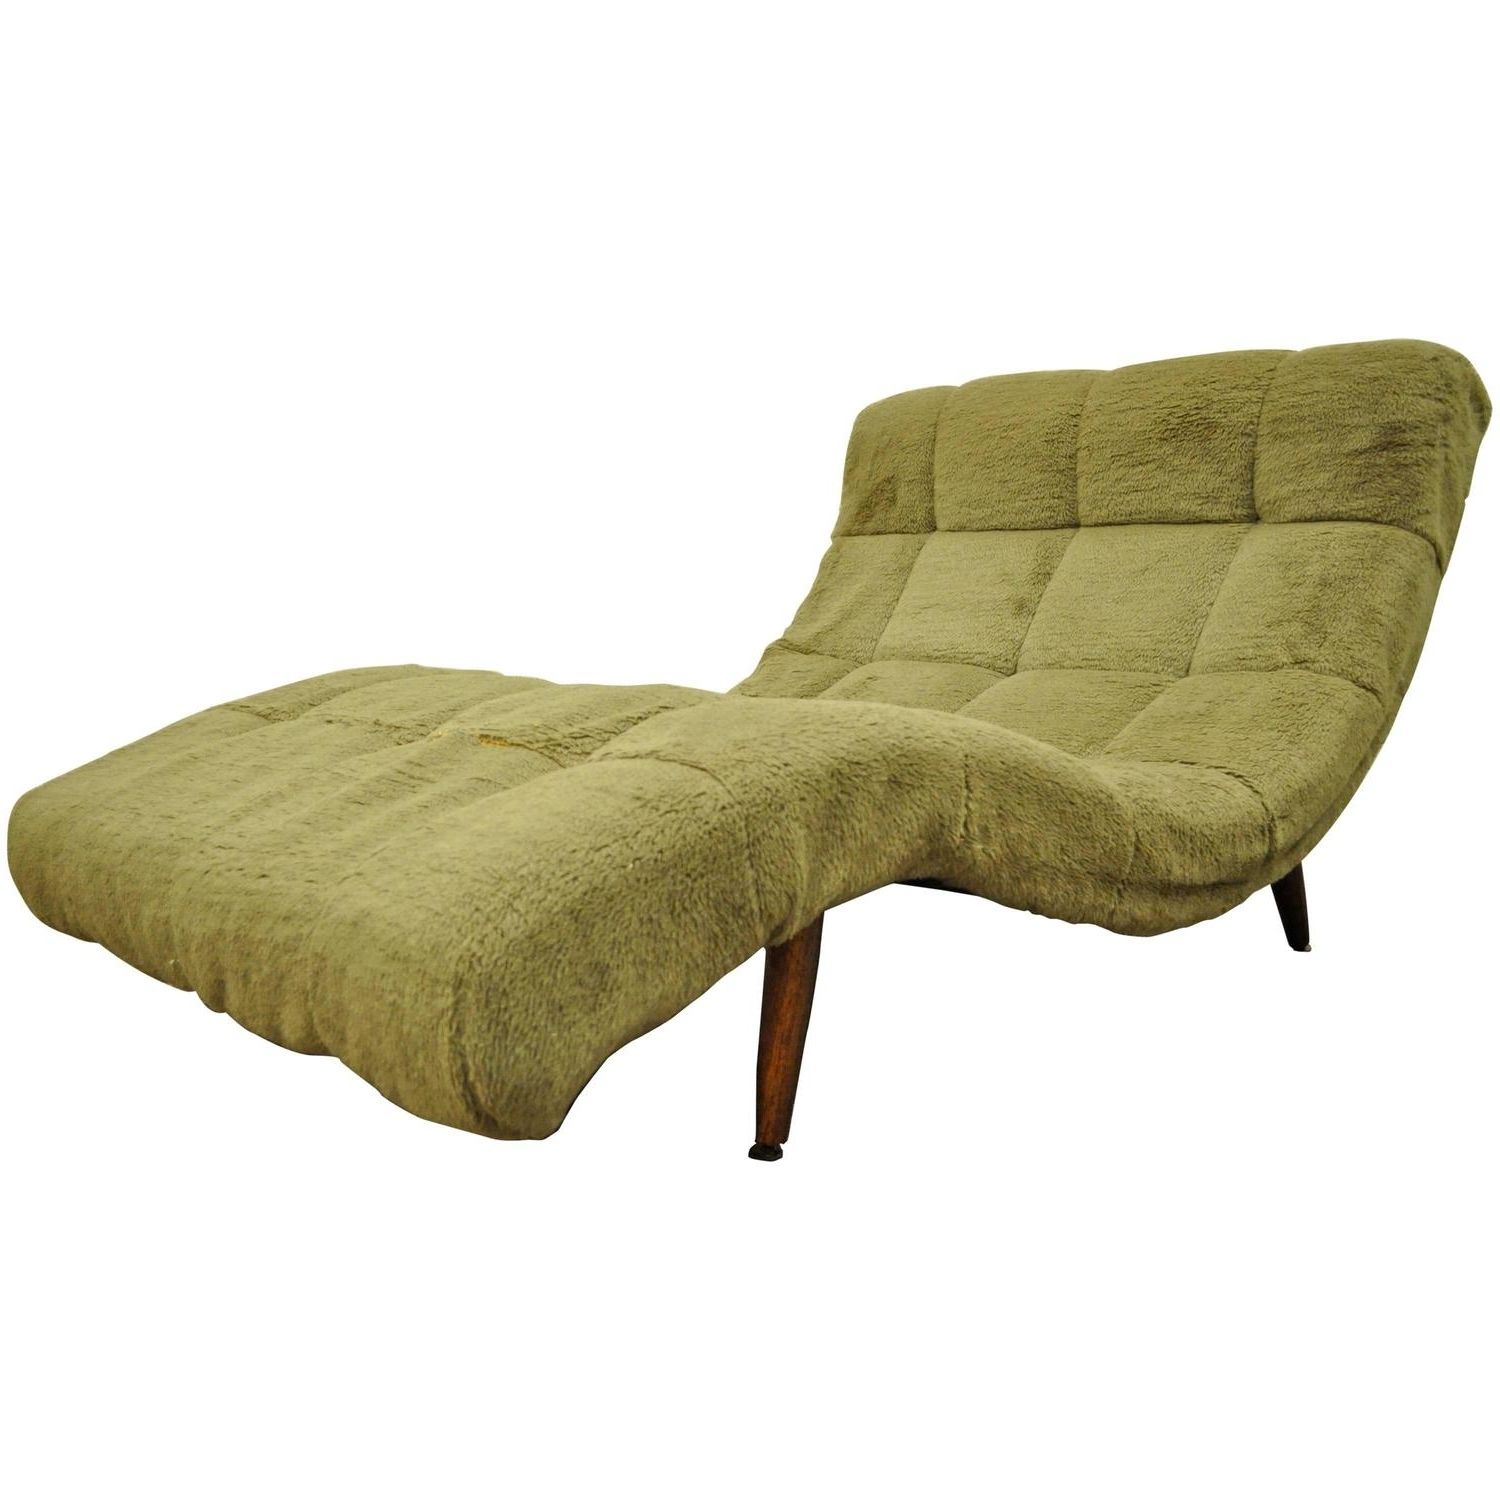 Modern Chaise Lounges Pertaining To Well Known Midcentury Modern Double Wide Wave Chaise Lounge In The Style Of (View 8 of 15)